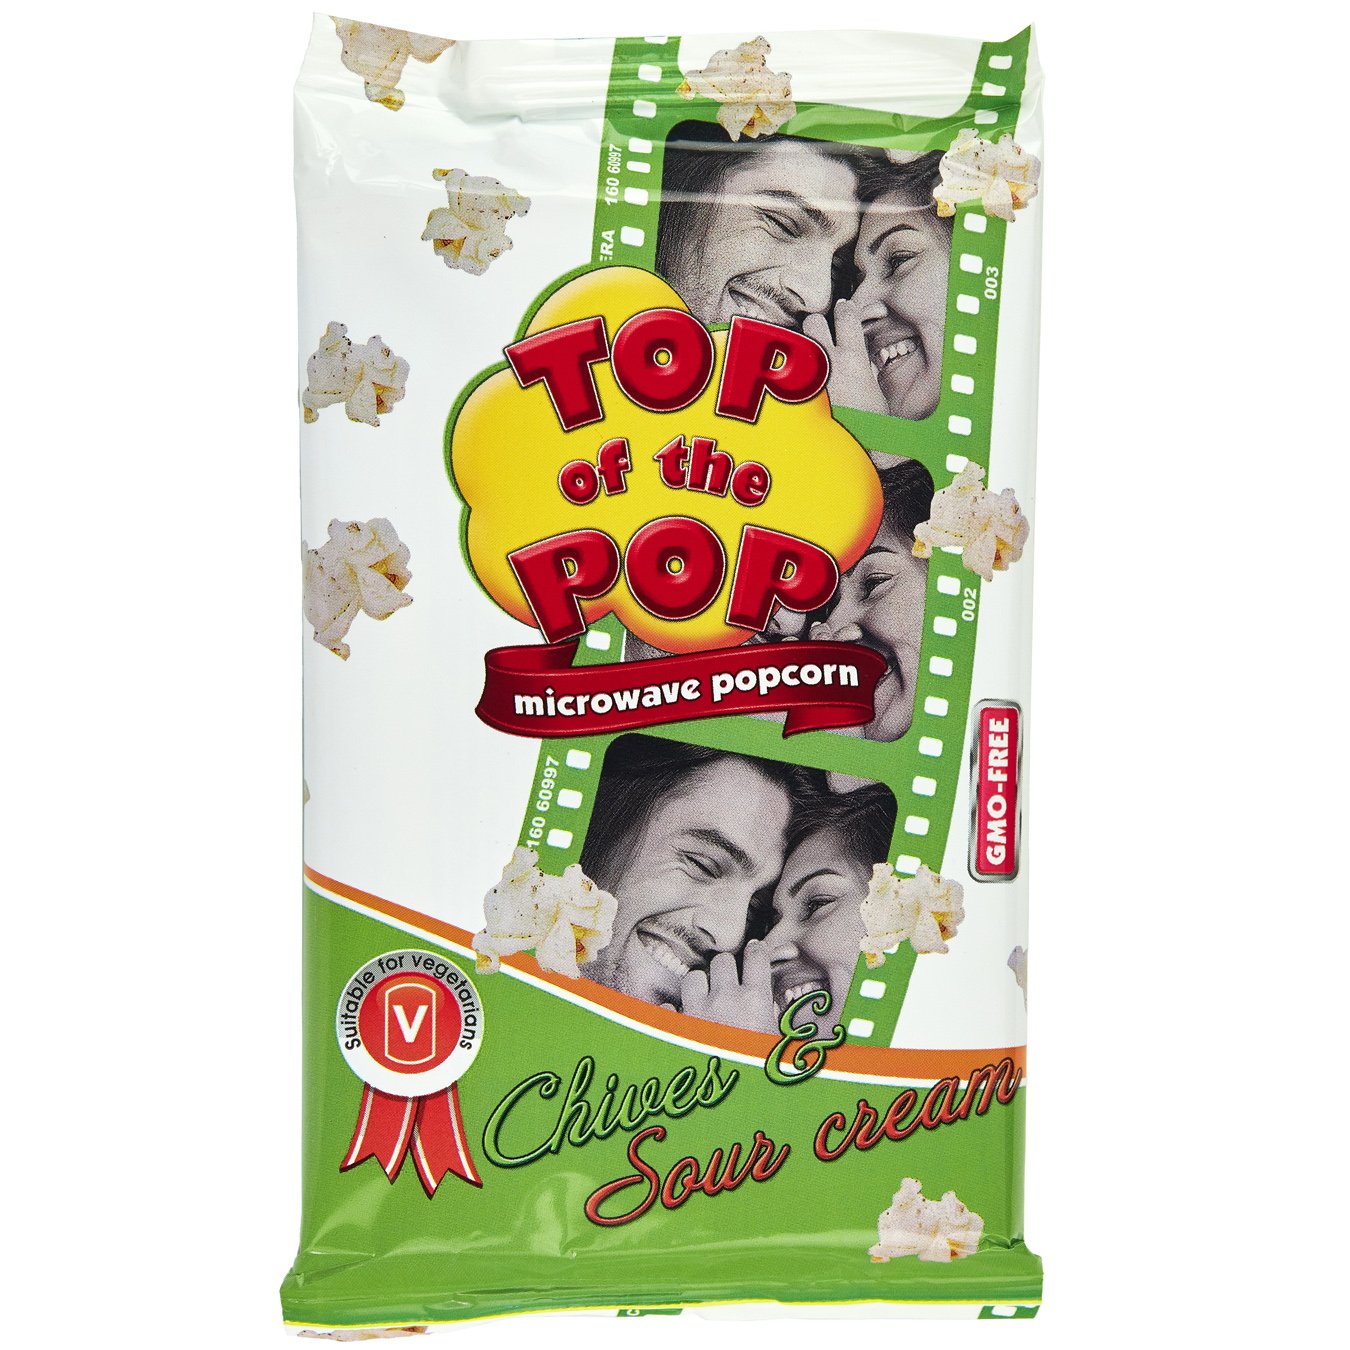 Popcorn Top of Pop for the microwave oven taste green onion-sour cream 100g